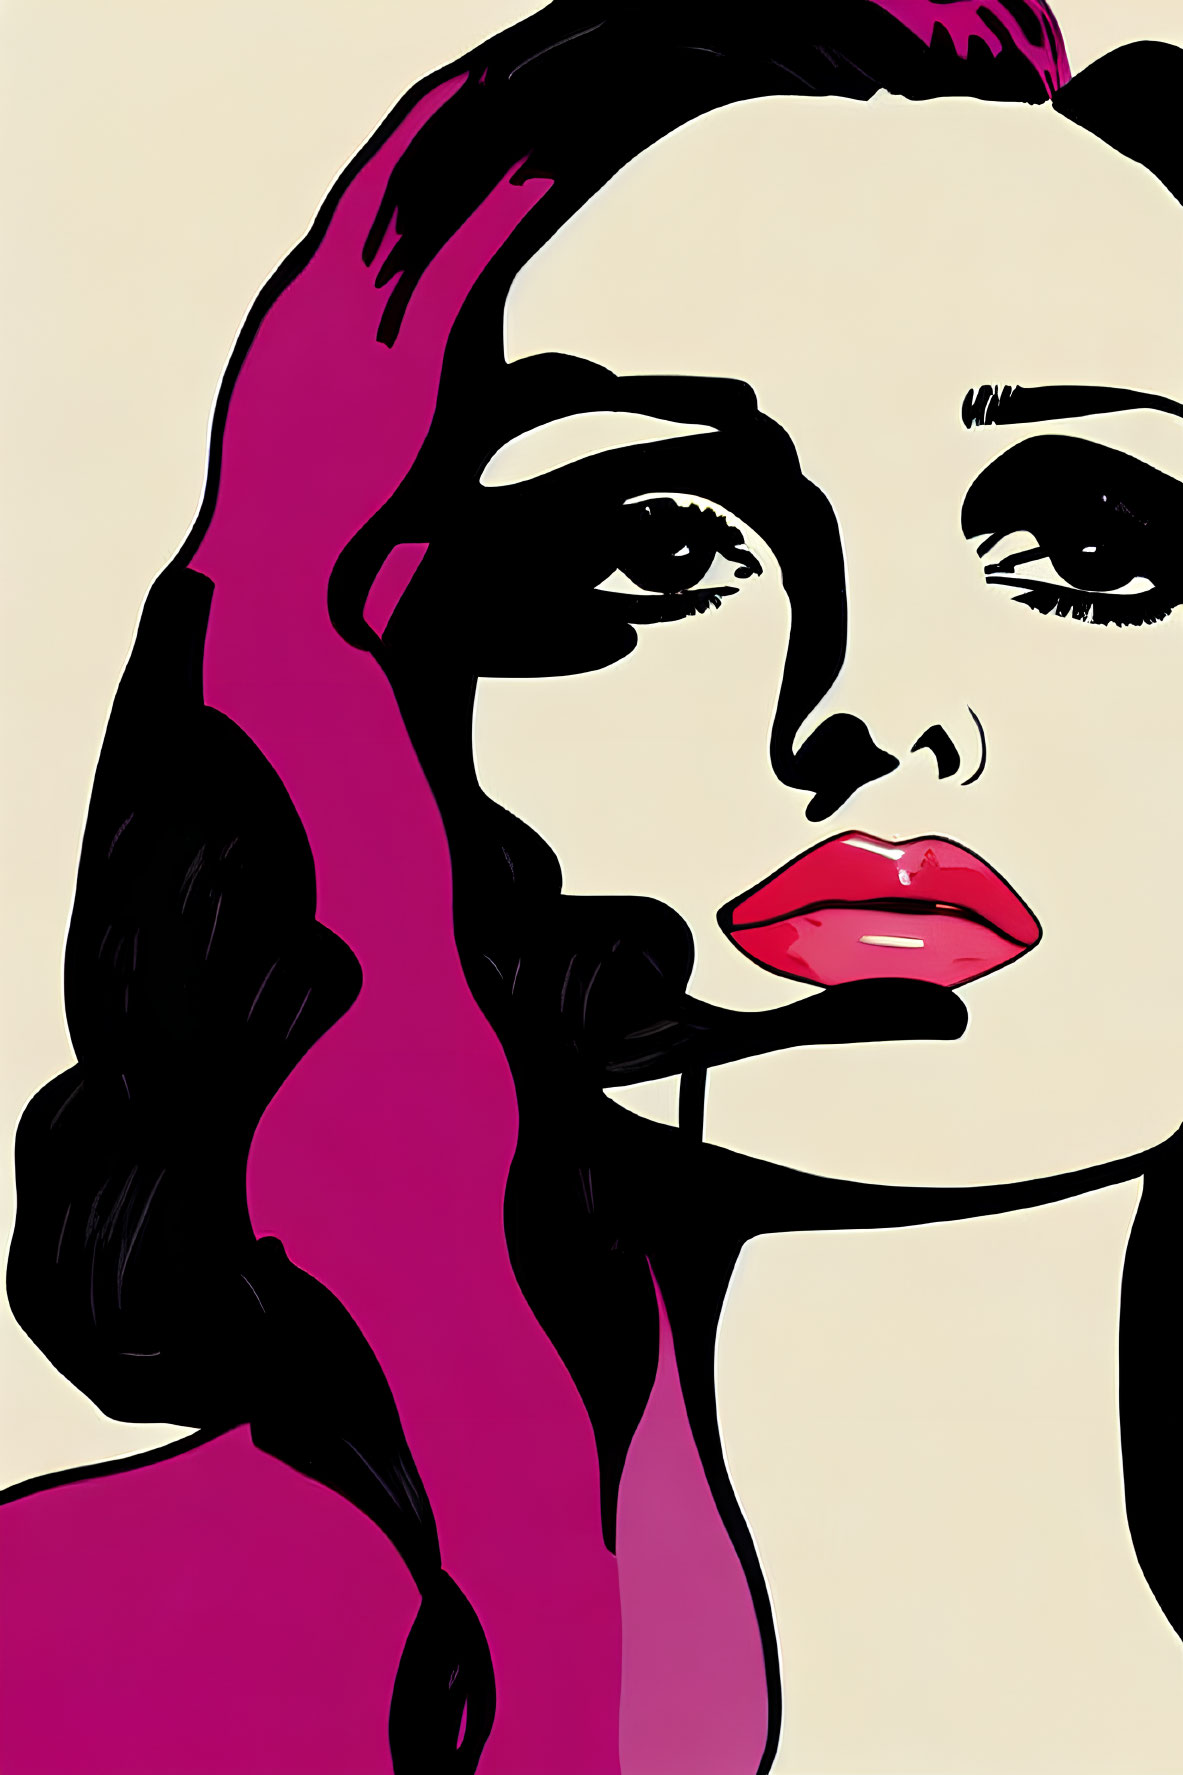 Colorful Pop Art Illustration of Woman with Pink Hair and Bold Outlines